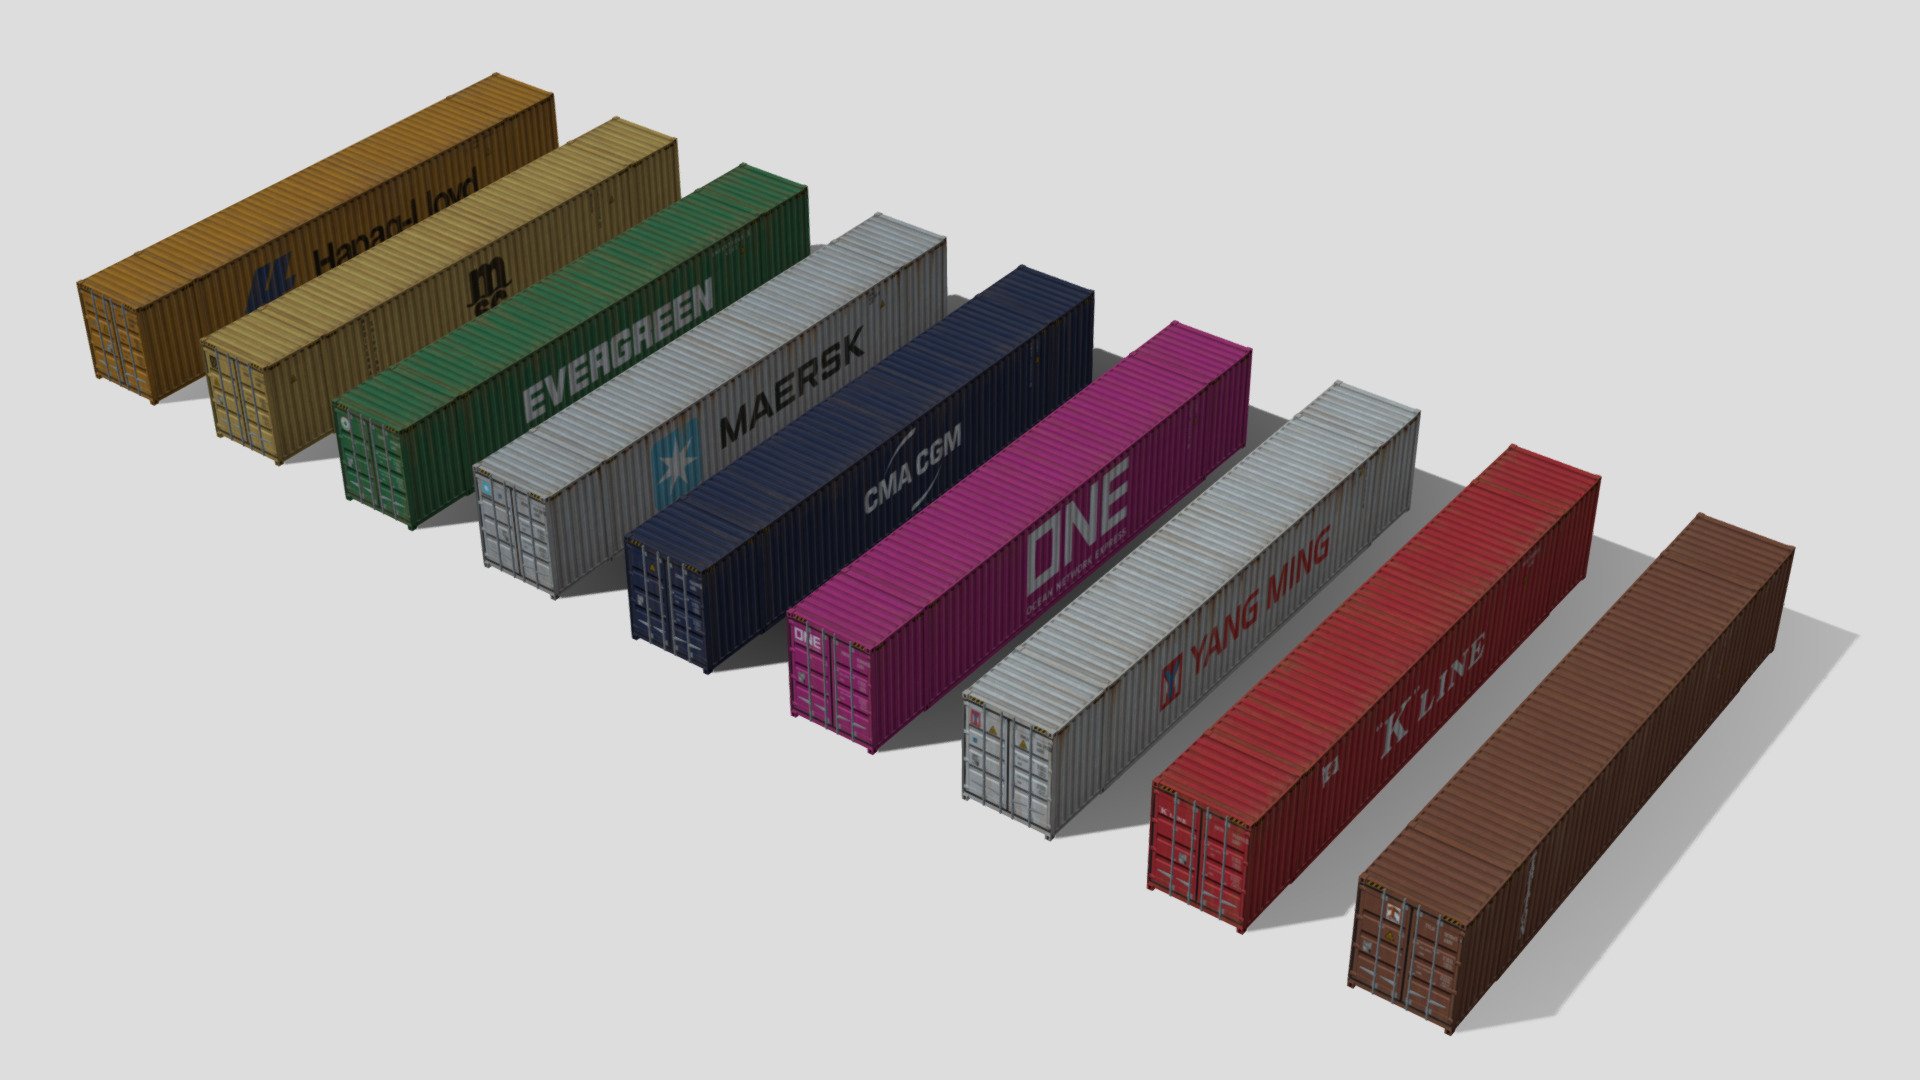 This is a pack containing nine real-life branded 53ft containers.

Container Brands: CMA CGM, Hapag Lloyd, Evergreen, MSC, Maersk, “K” Line, ONE, Triton, Yang Ming

This model was originally made as an asset for the game Cities: Skylines. There are some minor simplifications to the texture and model to keep it optimised for the game.

Available formats: Wavefront OBJ (.obj), Autodesk FBX (.fbx), STL (.stl)

Polygon count: 1,548 Vertex count: 2,376

Model made in Blender 3.0 - 53ft Containers - Buy Royalty Free 3D model by Nostrix 3d model